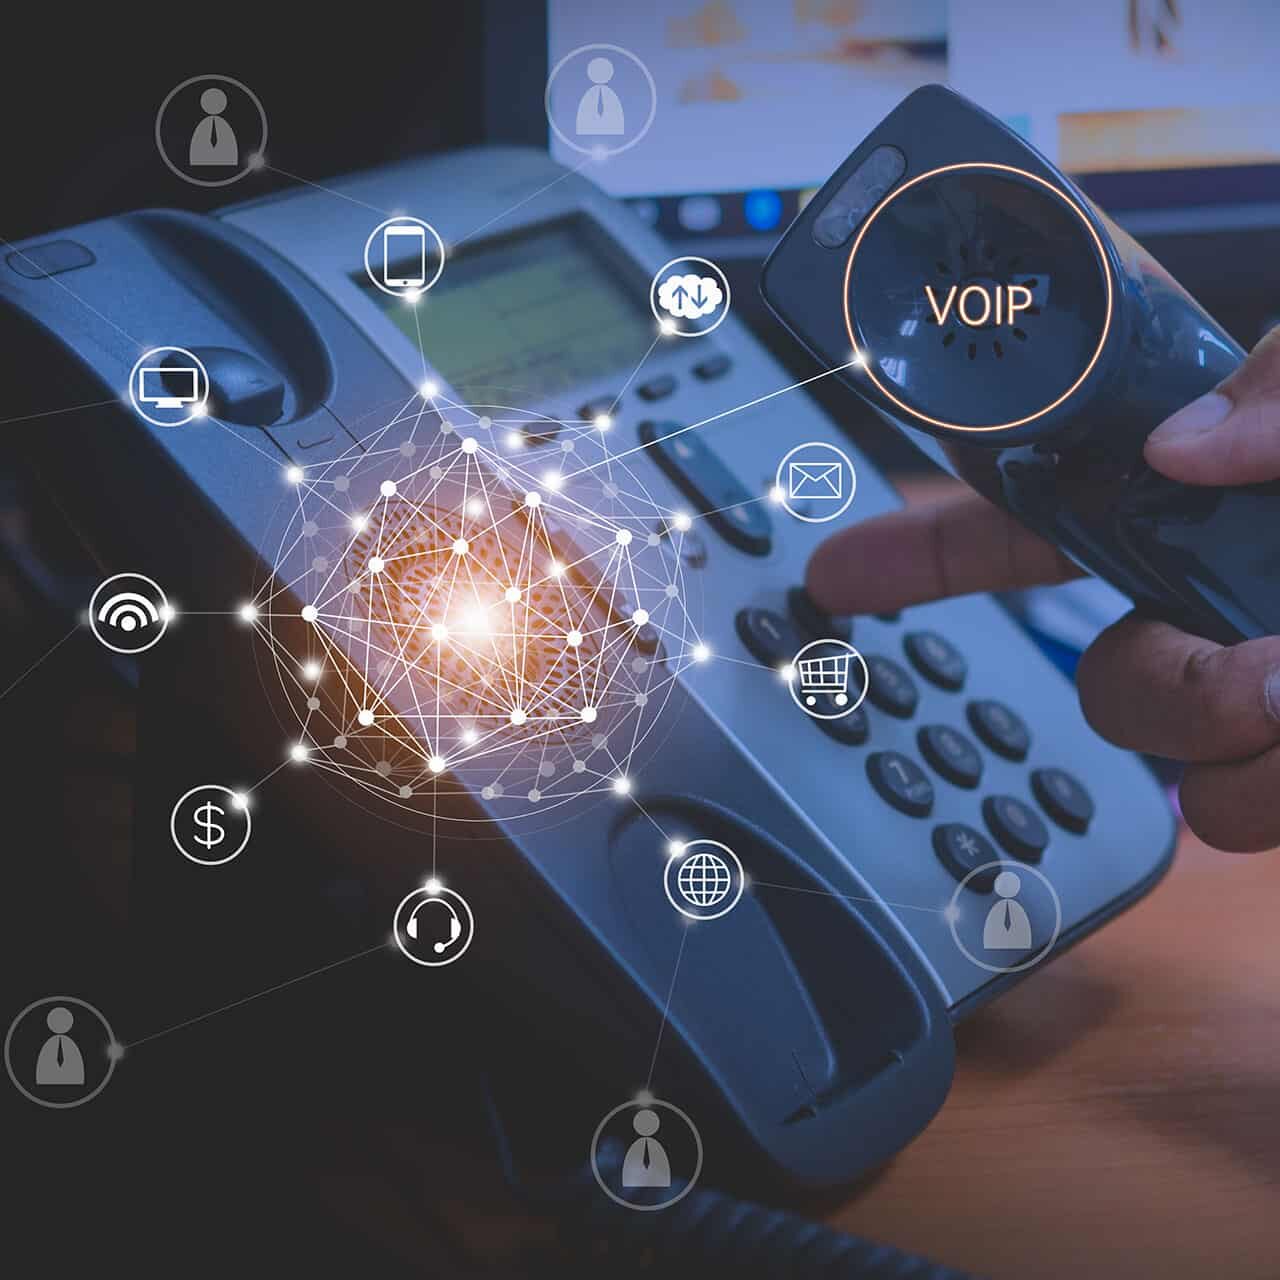 Hand of man using ip phone with flying icon of voip services and people connection, voip and telecommunication